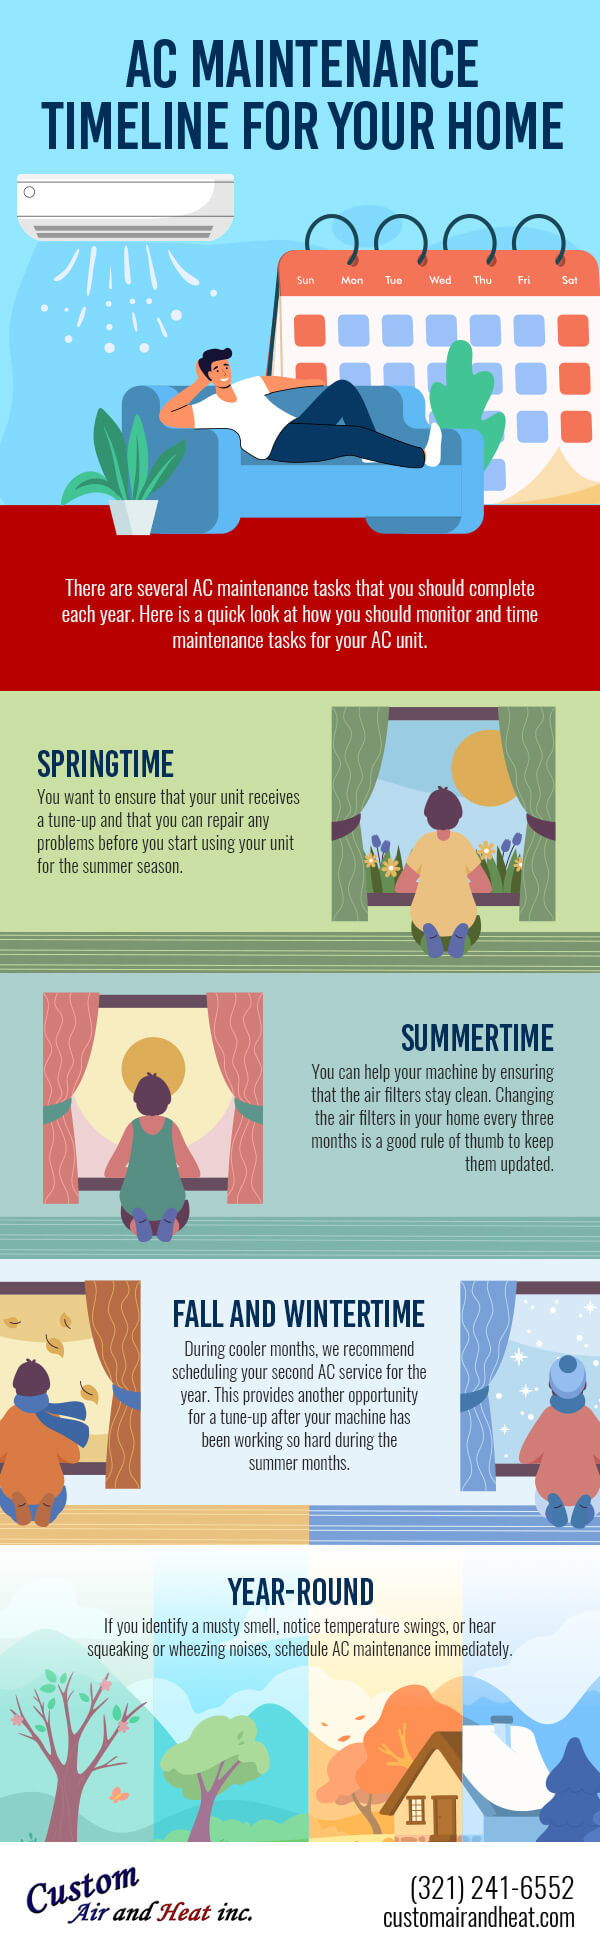 AC Maintenance Timeline for Your Home